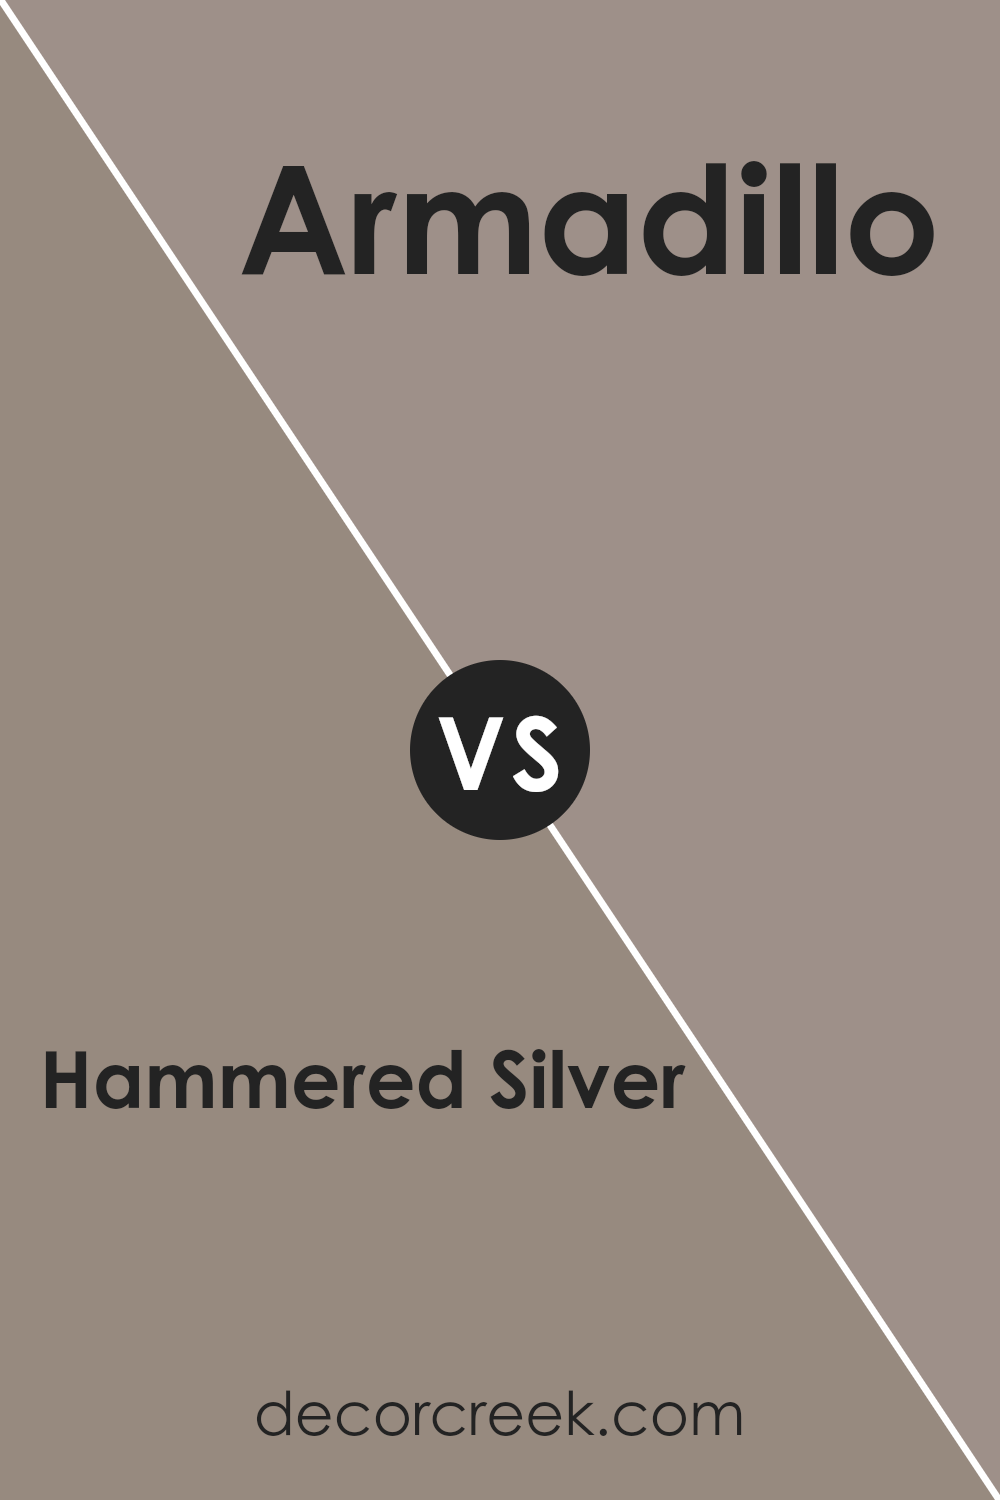 hammered_silver_sw_2840_vs_armadillo_sw_9160